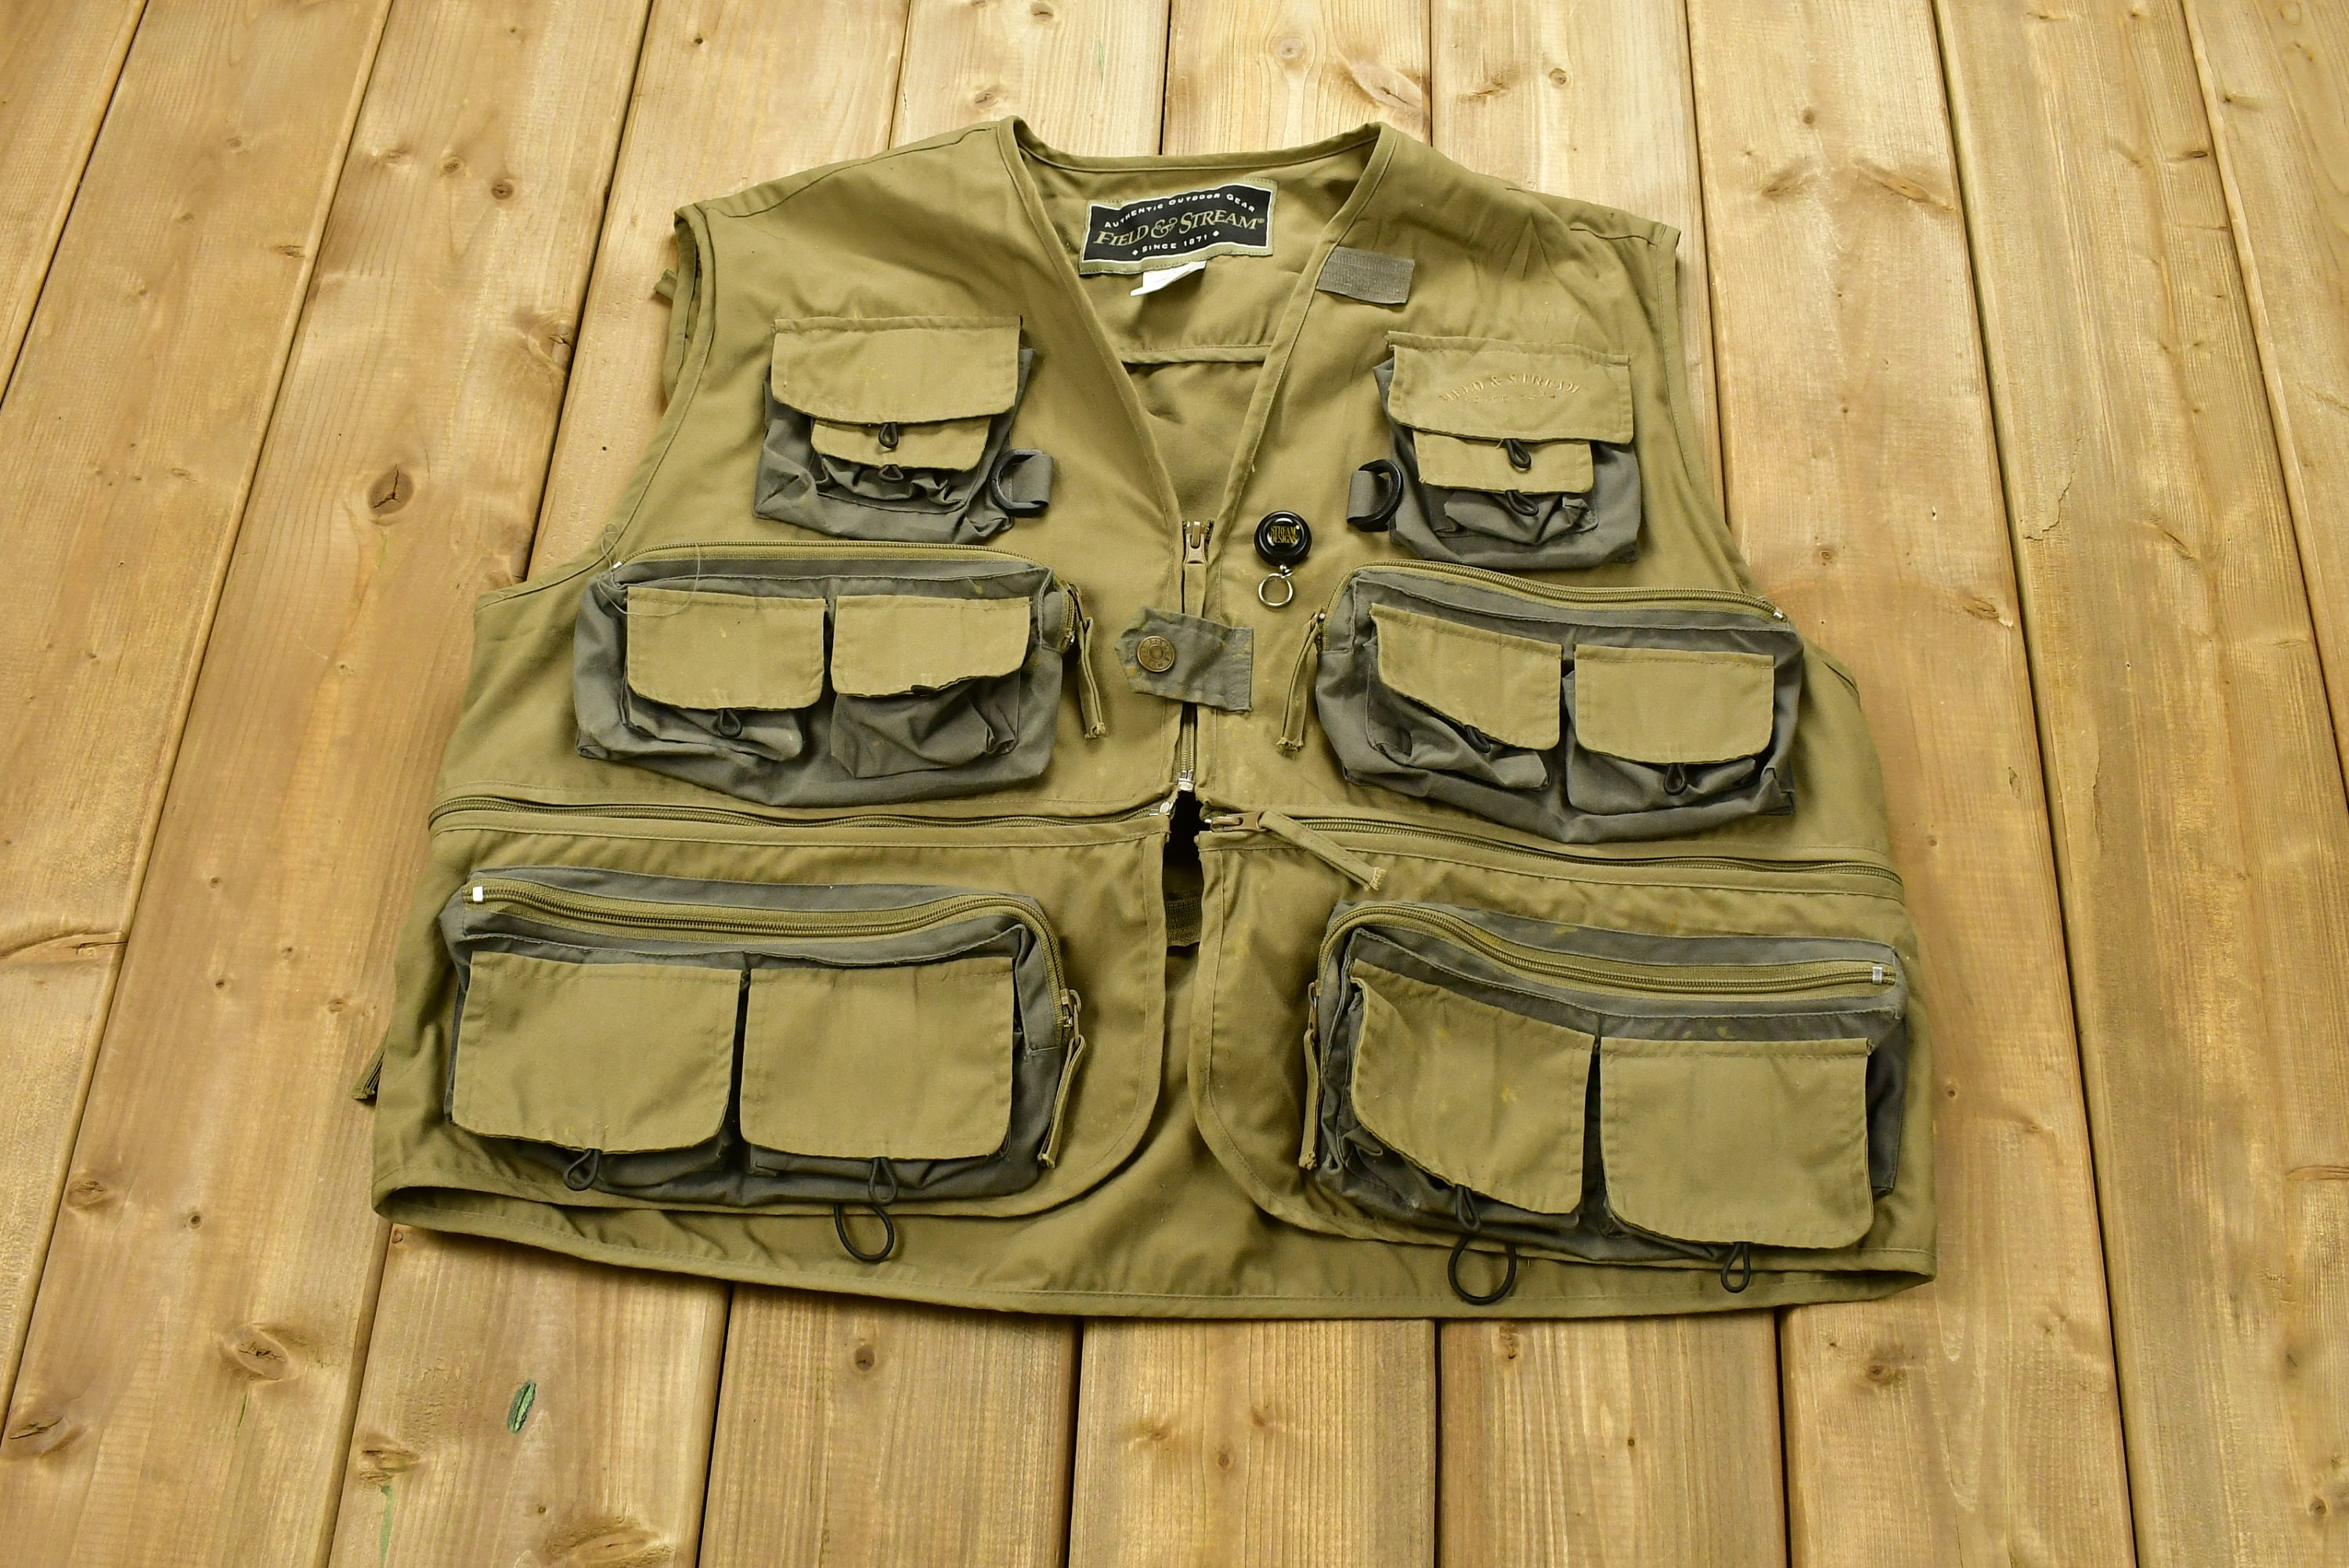 Vintage 1990s Field & Stream Utility Tactical Fishing Vest